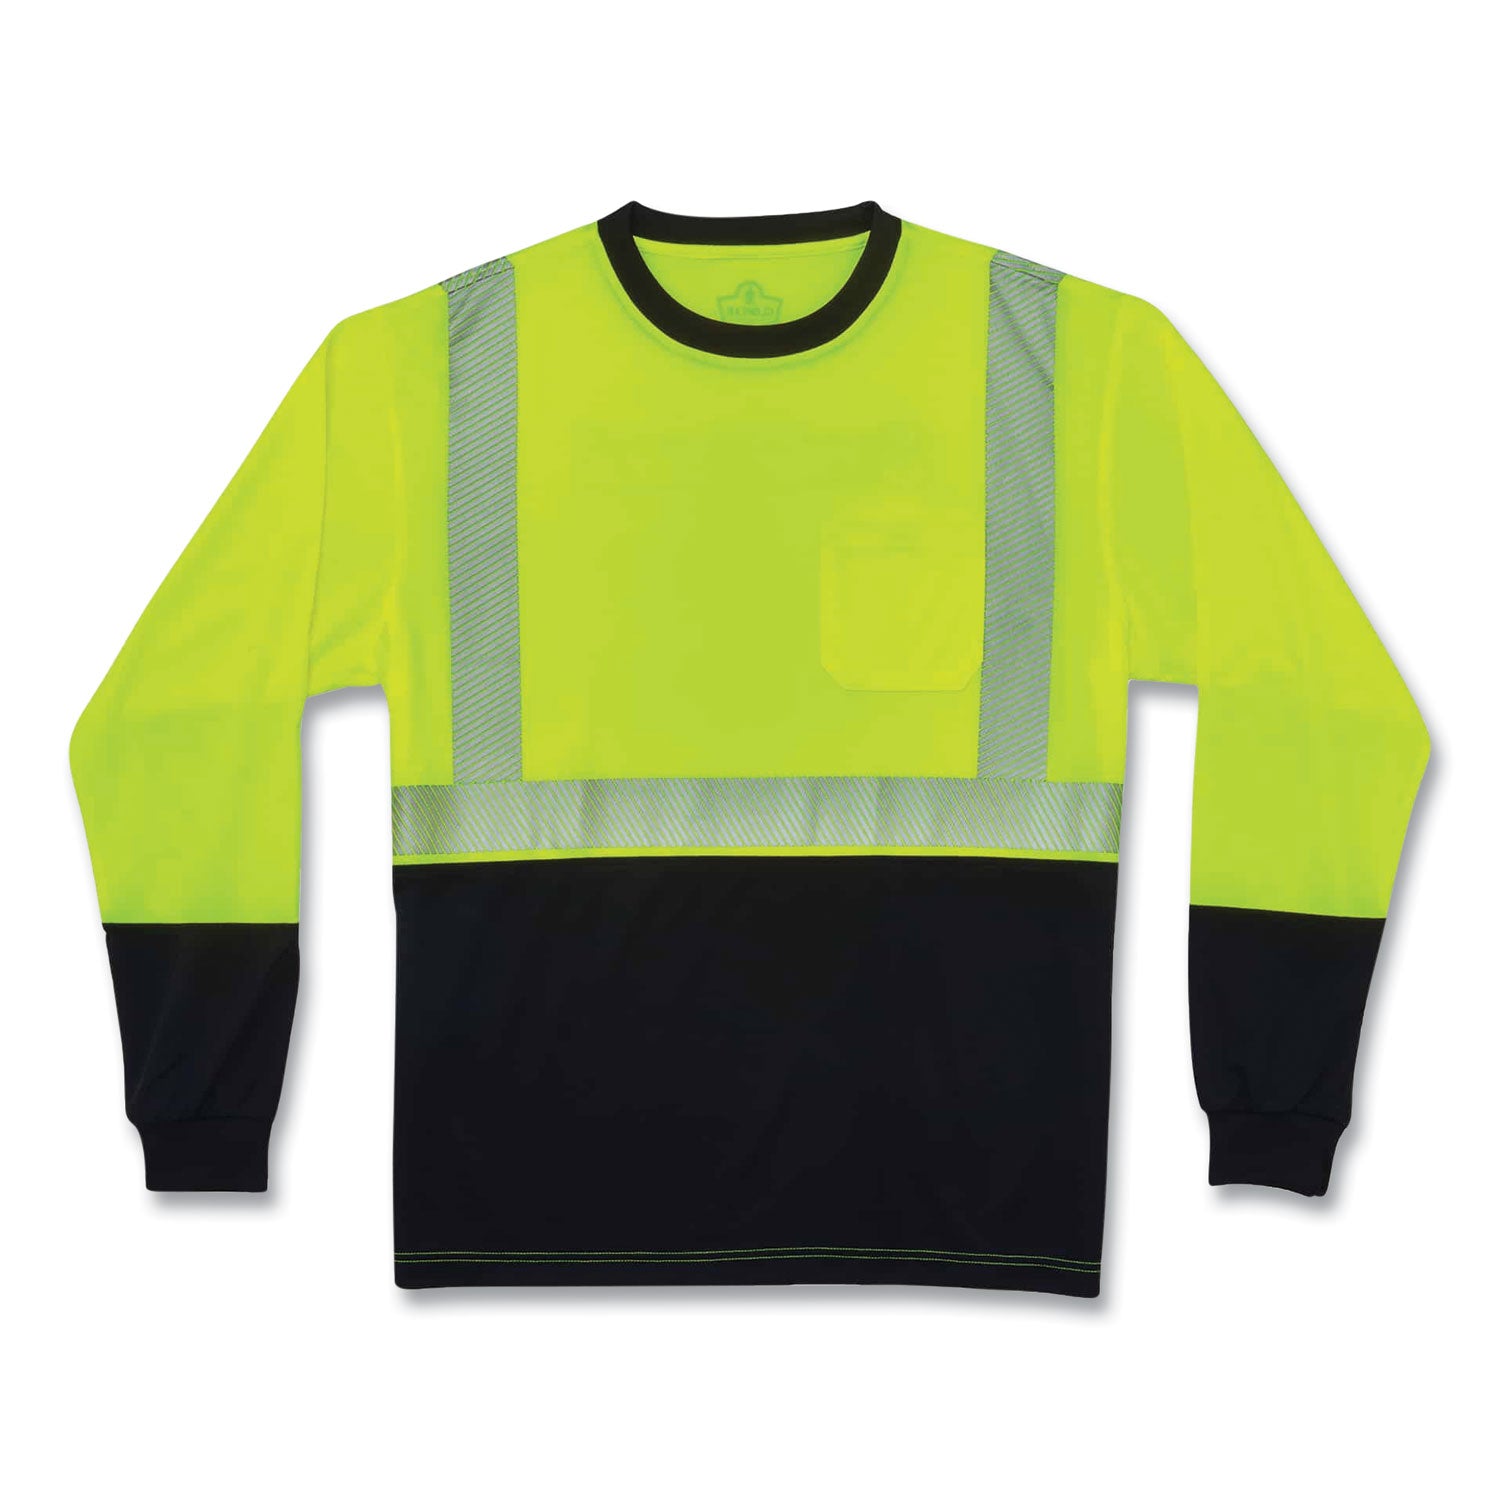 glowear-8281bk-class-2-long-sleeve-shirt-with-black-bottom-polyester-5x-large-lime-ships-in-1-3-business-days_ego22639 - 1